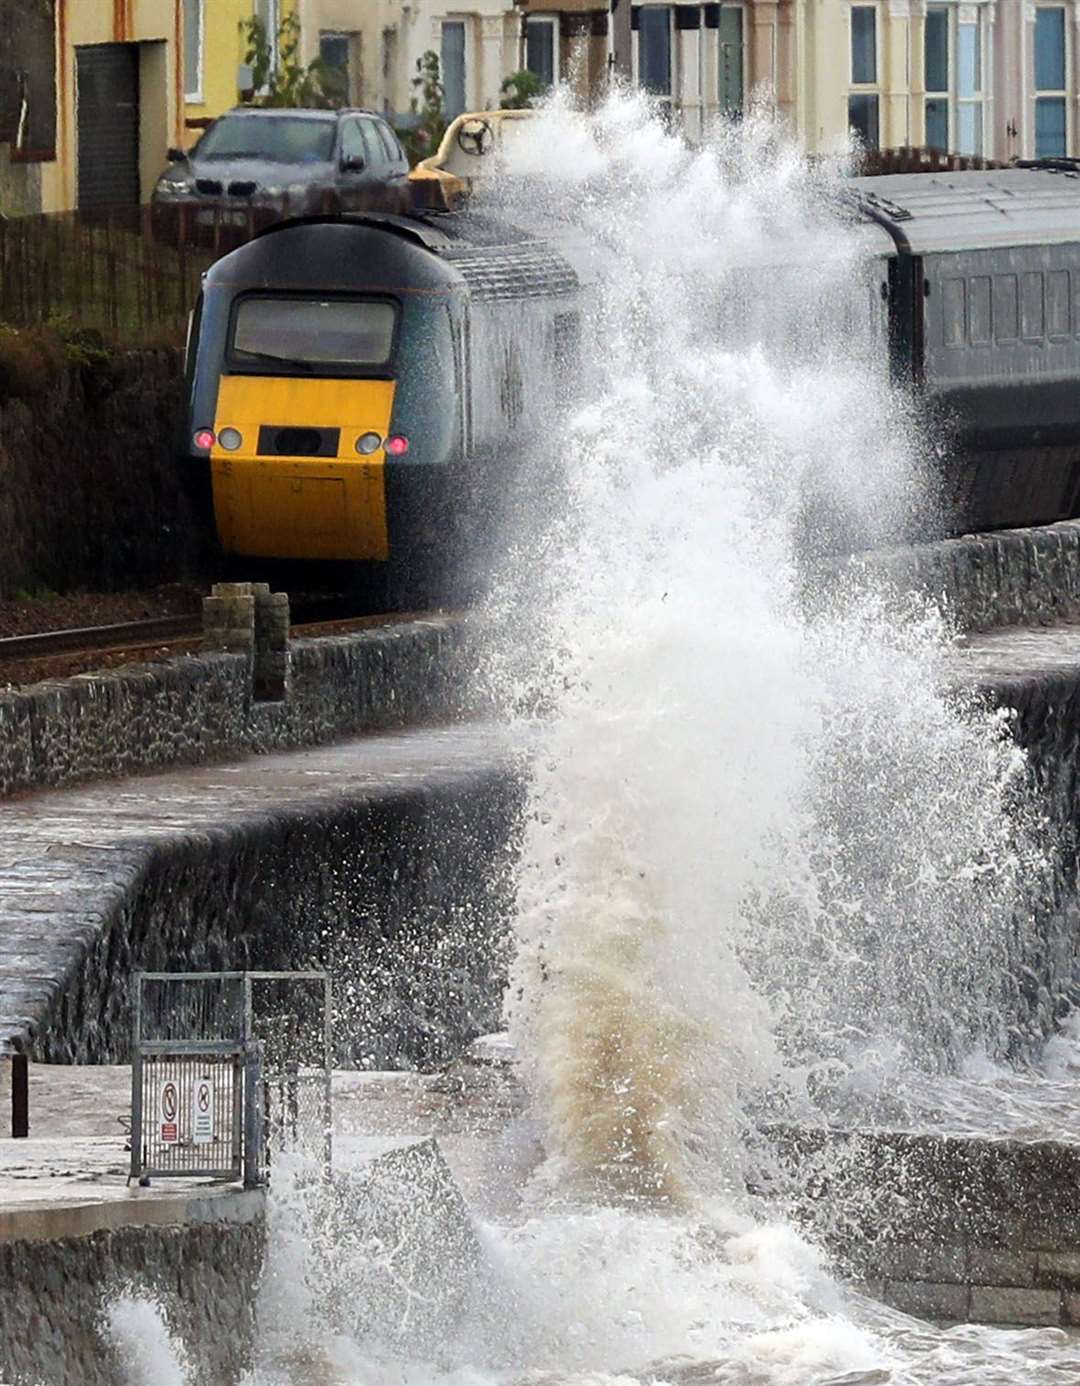 A train passes by strong waves in Dawlish, Devon, on Thursday (Steve Parsons/PA)